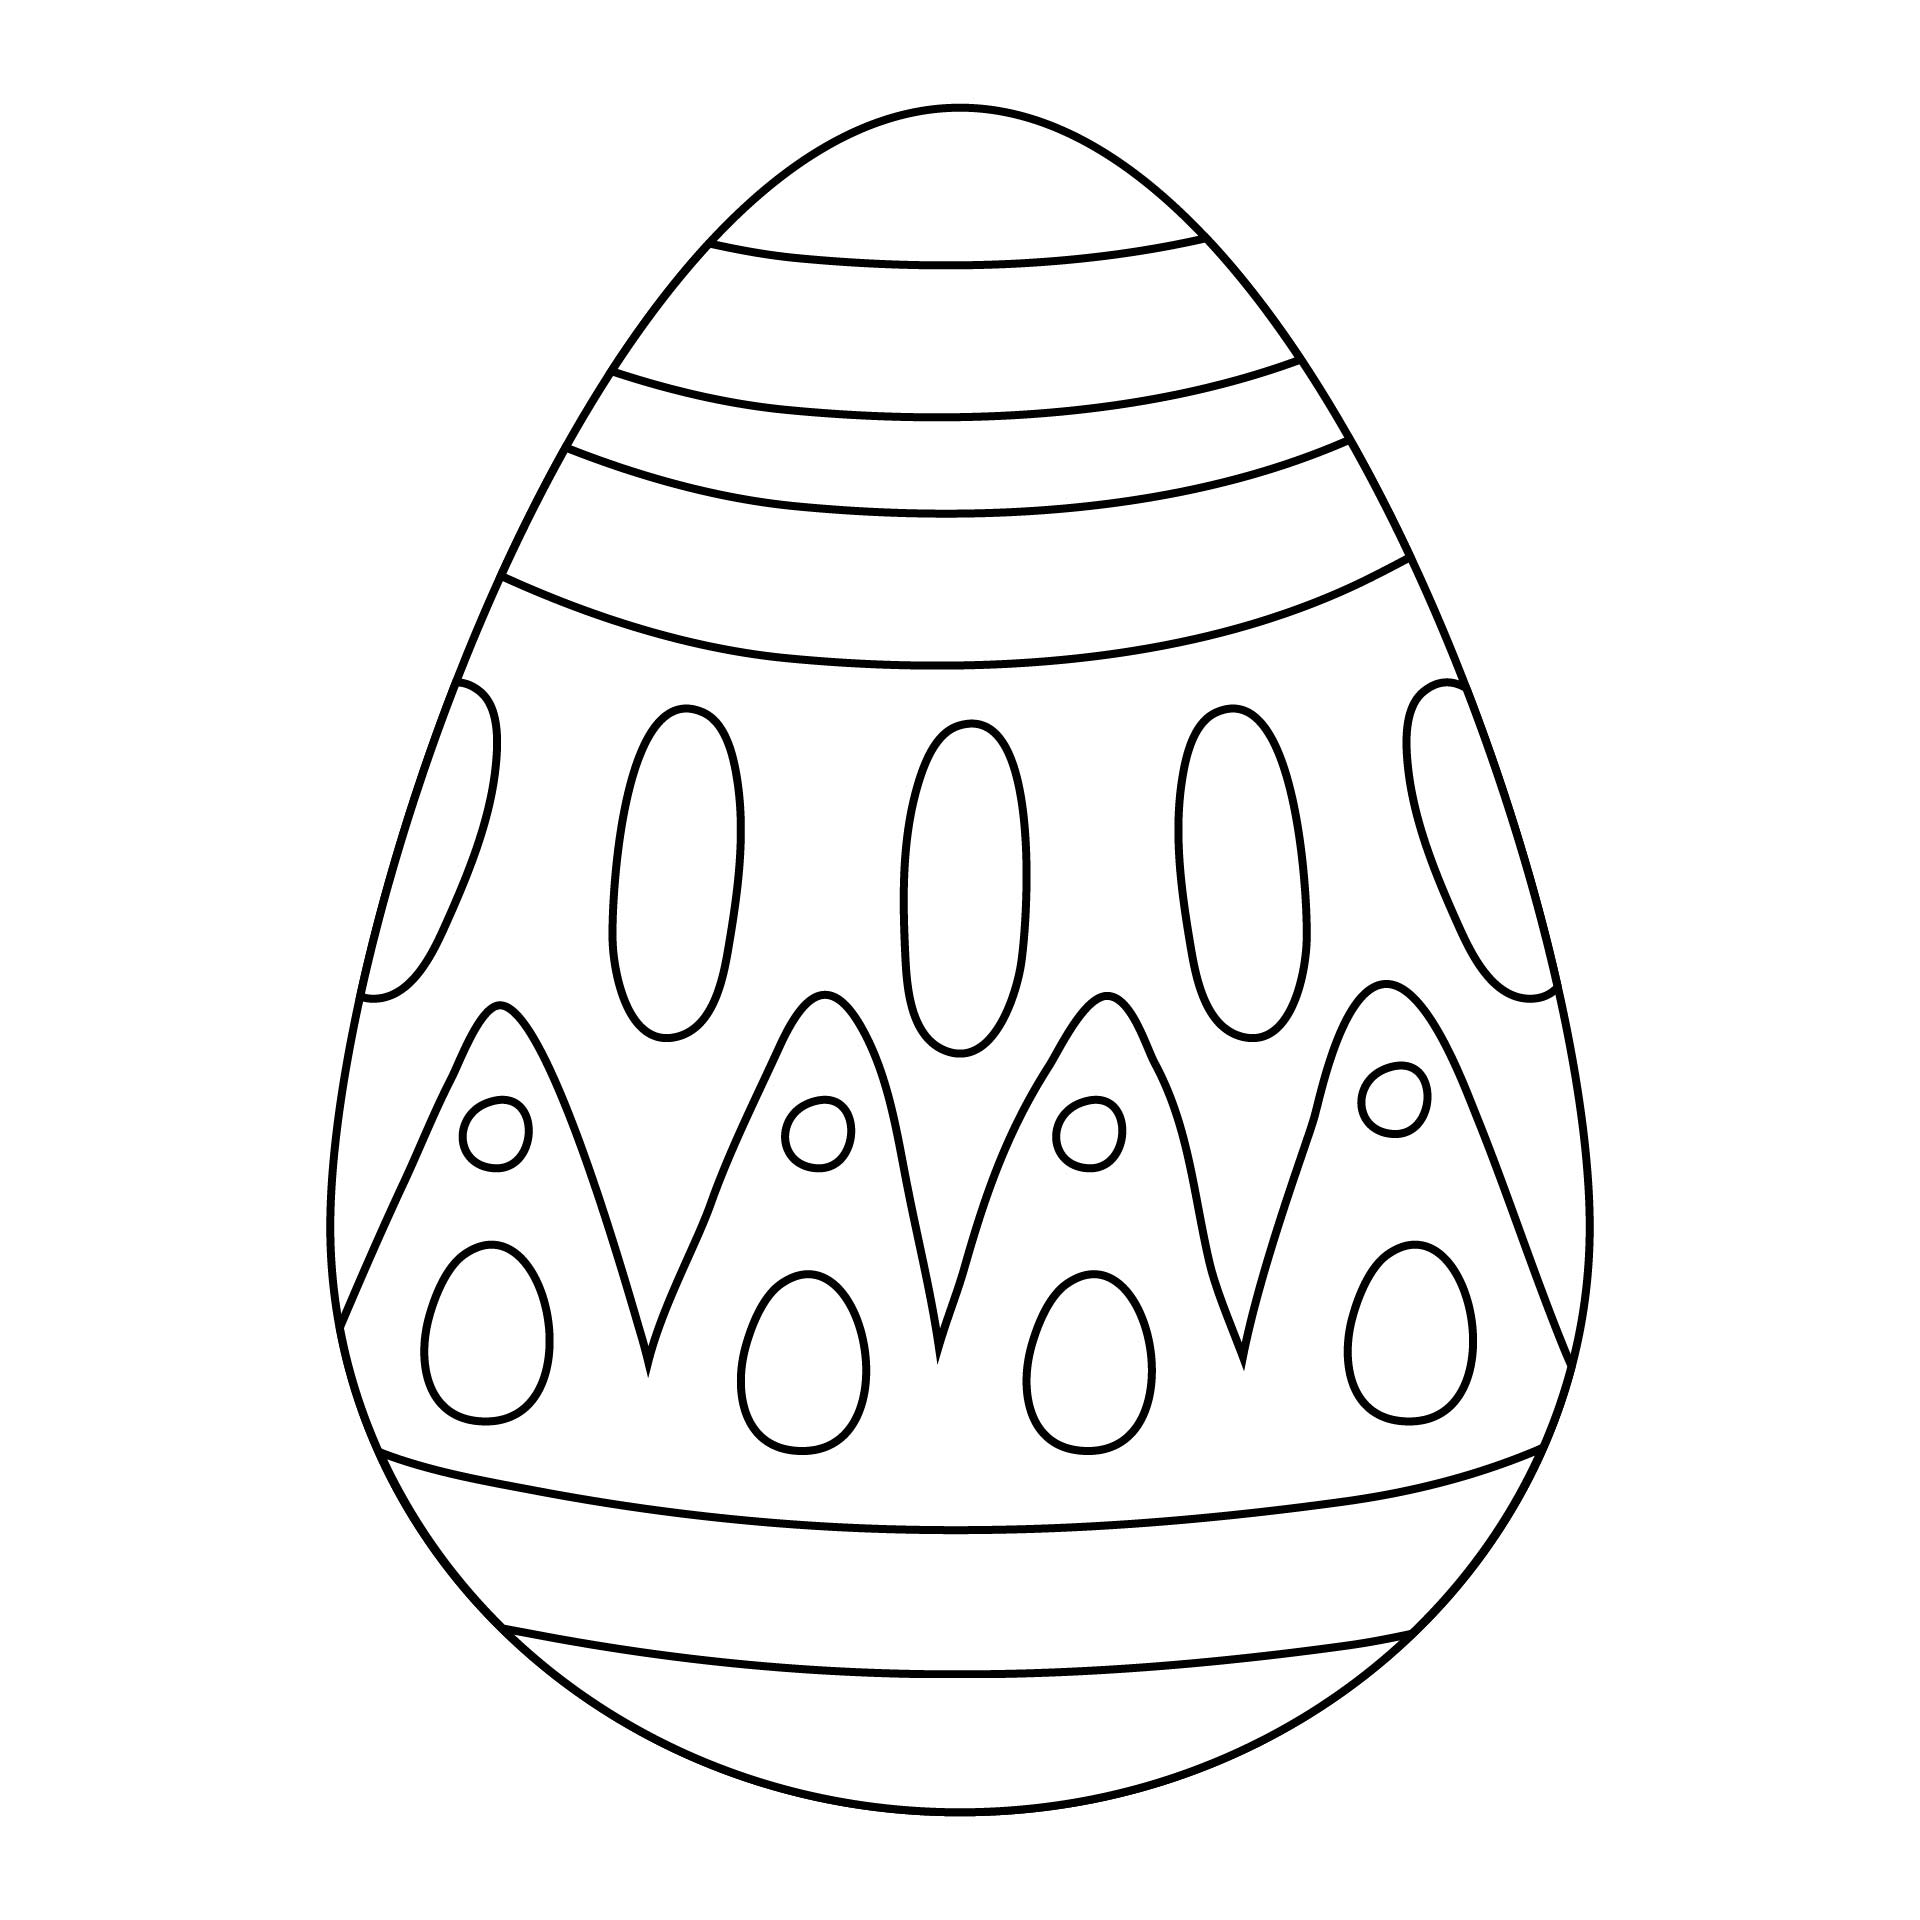 Printable Plain Easter Egg Coloring Pages